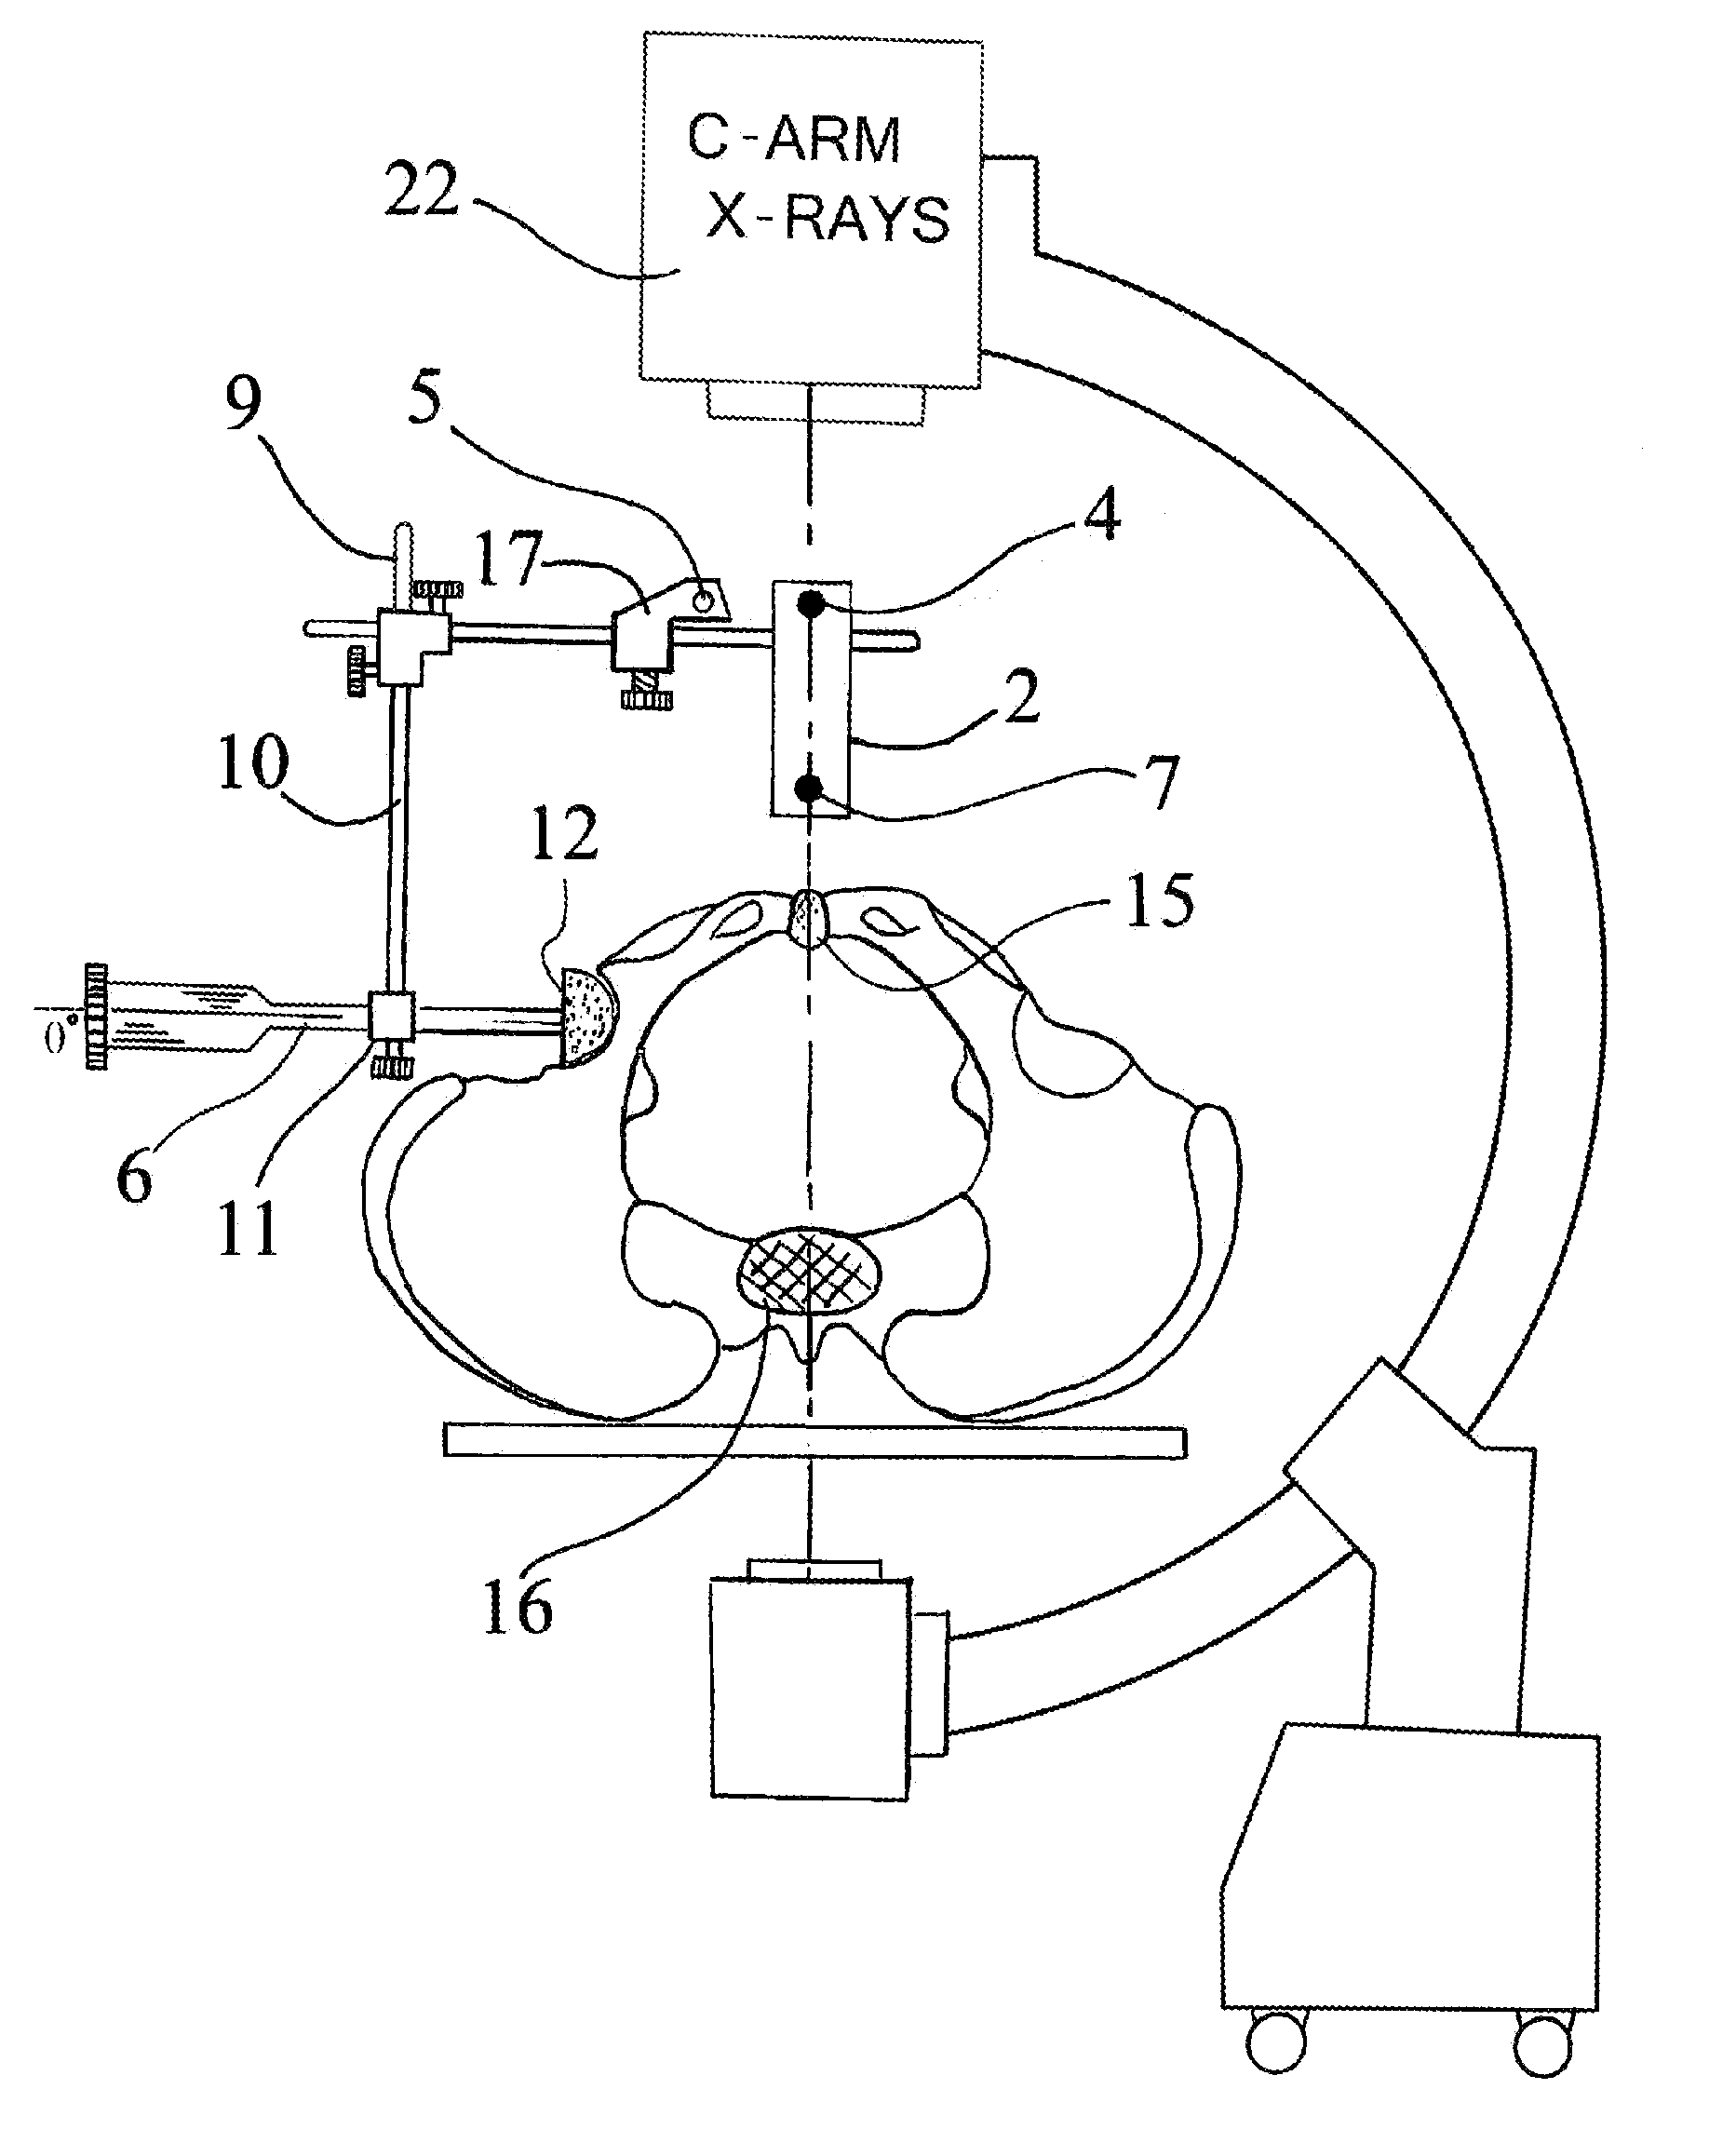 Acetabular cup device and method thereof